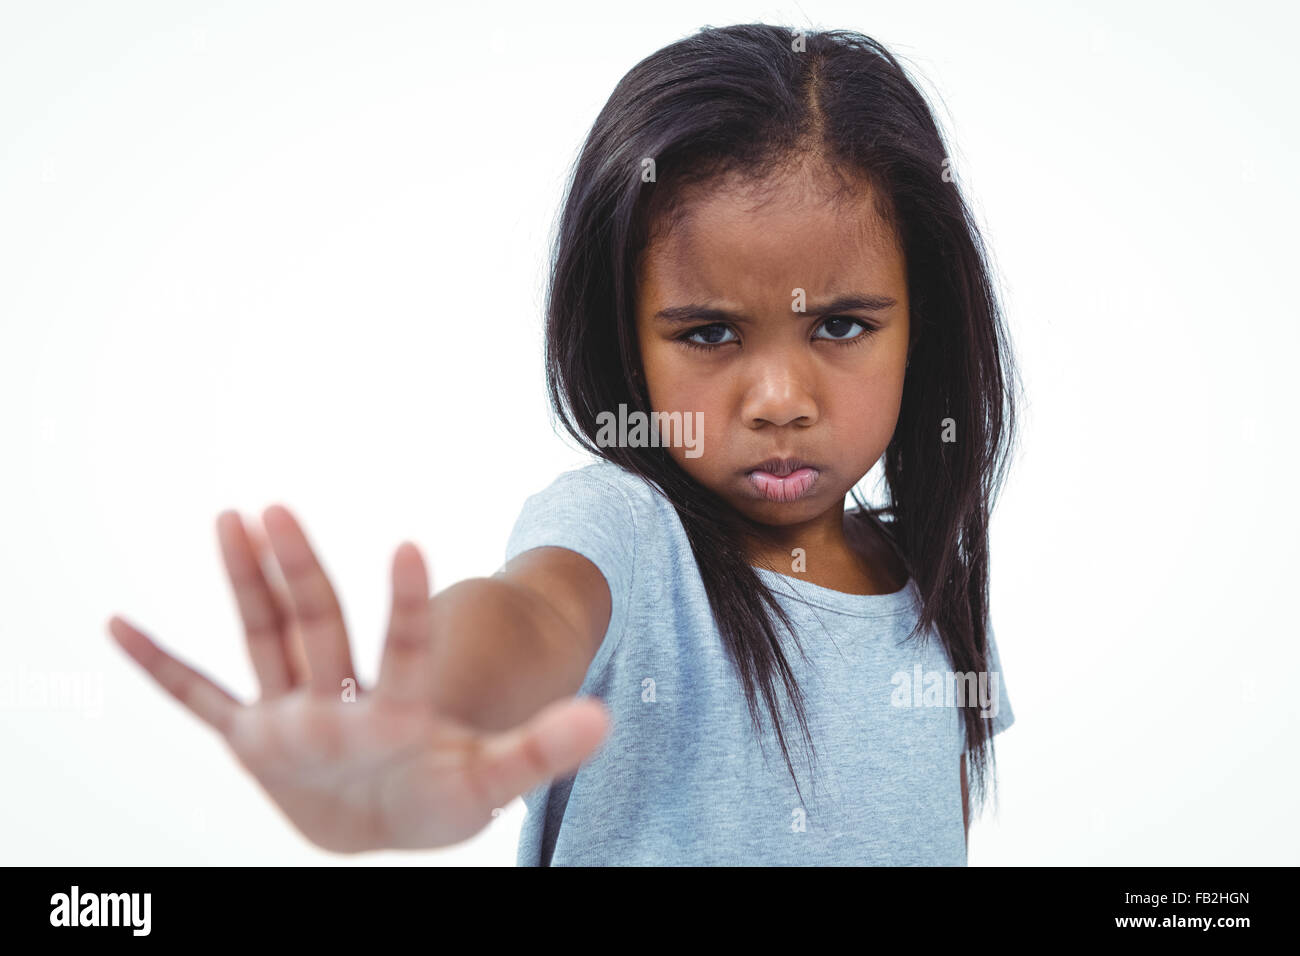 Girl making grimace holding hand to camera Stock Photo